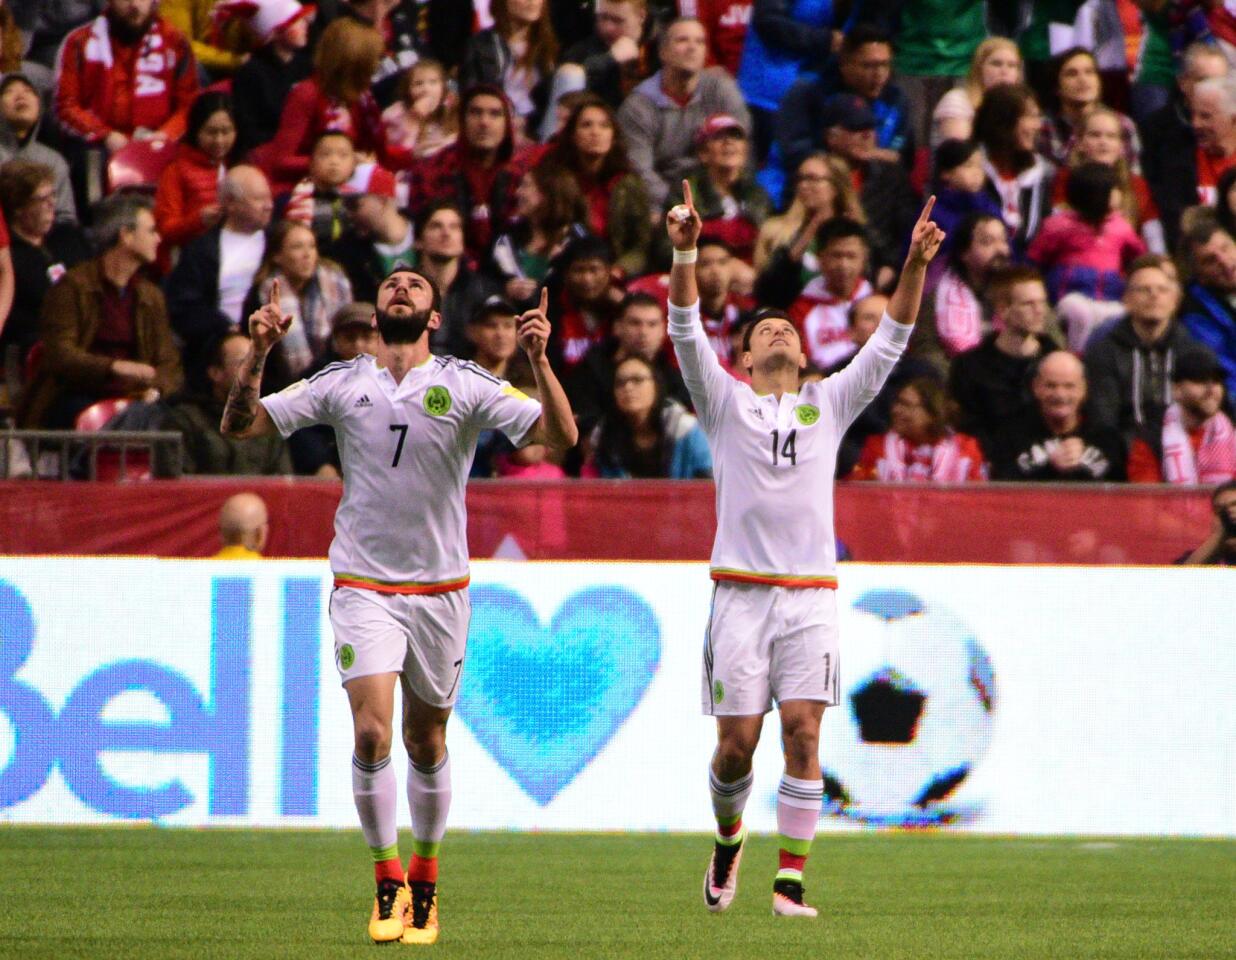 Vancouver, British Columbia, CAN; Canada midfielder Samuel Piette (14) celebrates after scoring a goal against Canada goalkeeper Milan Borjan (not pictured) during the first half at BC Place.